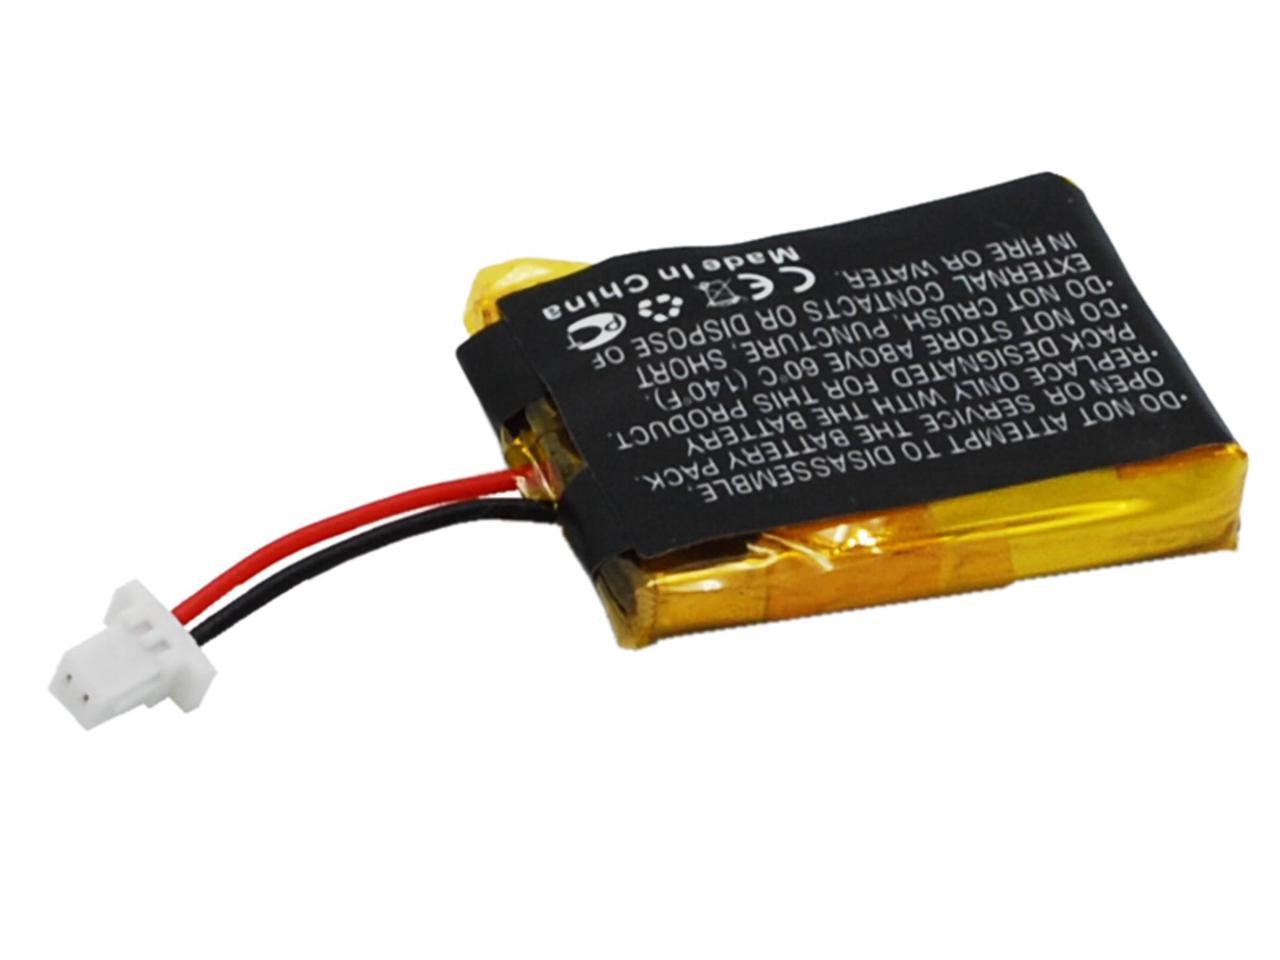 Replacement Battery For OPTICON OPN-2001 